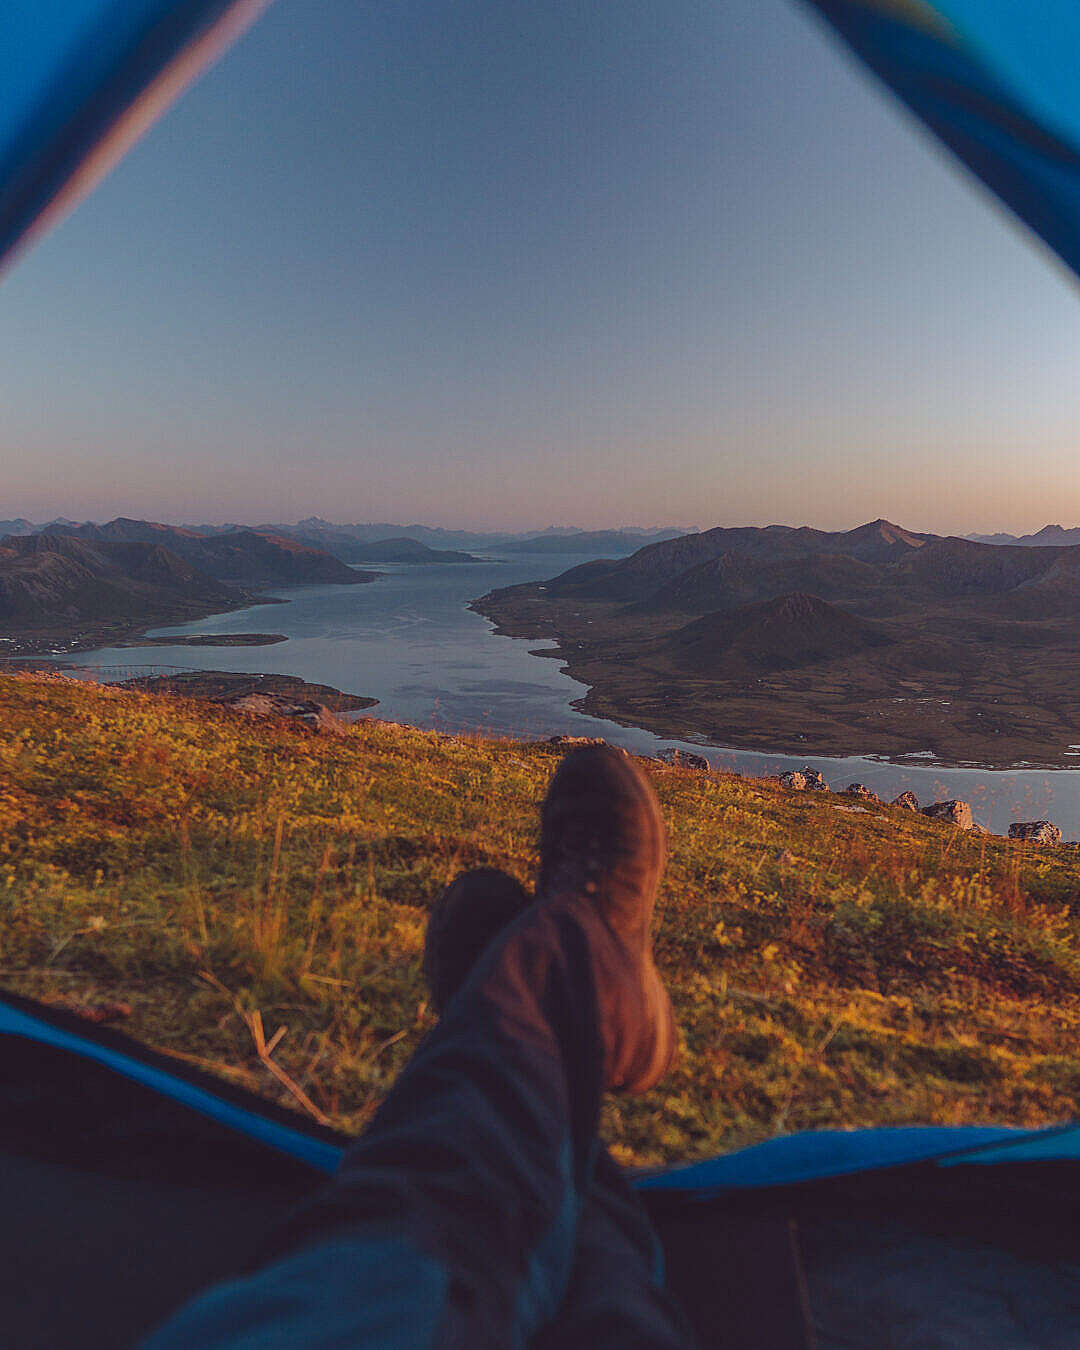 Download Perfect Tent View on Norwegian Fjord FREE Stock Photo